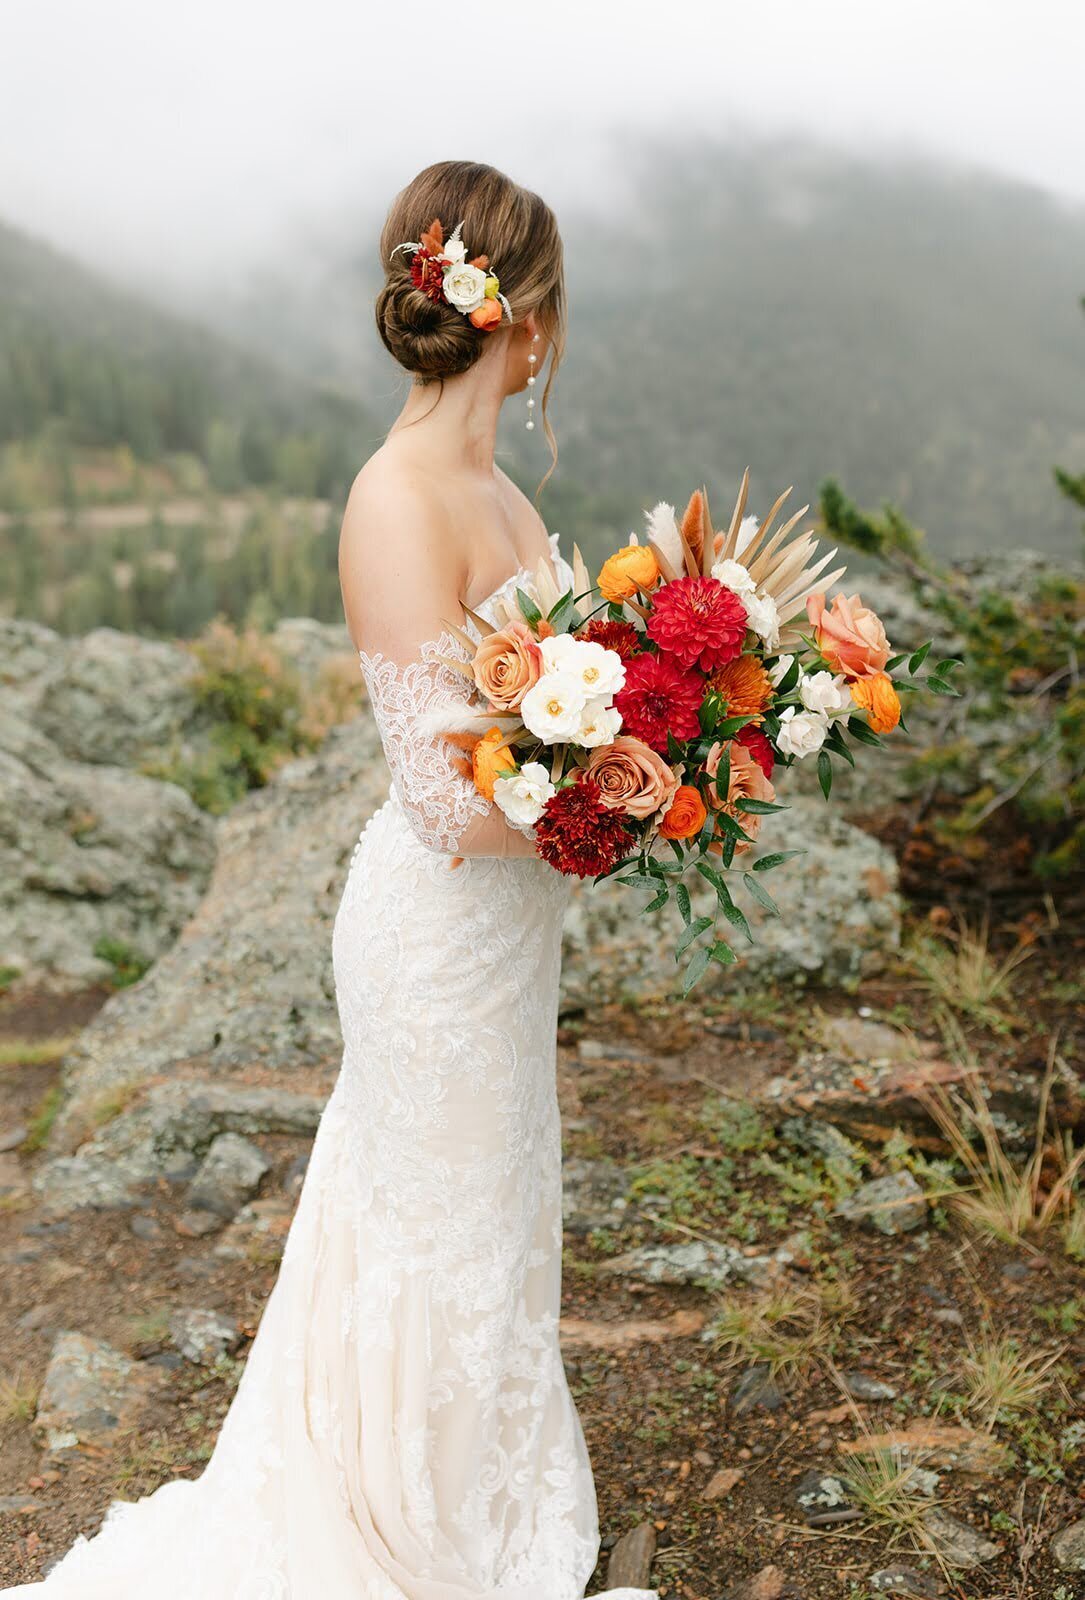 Fully ready bride with her fall colored bouquet at North Star Gatherings.